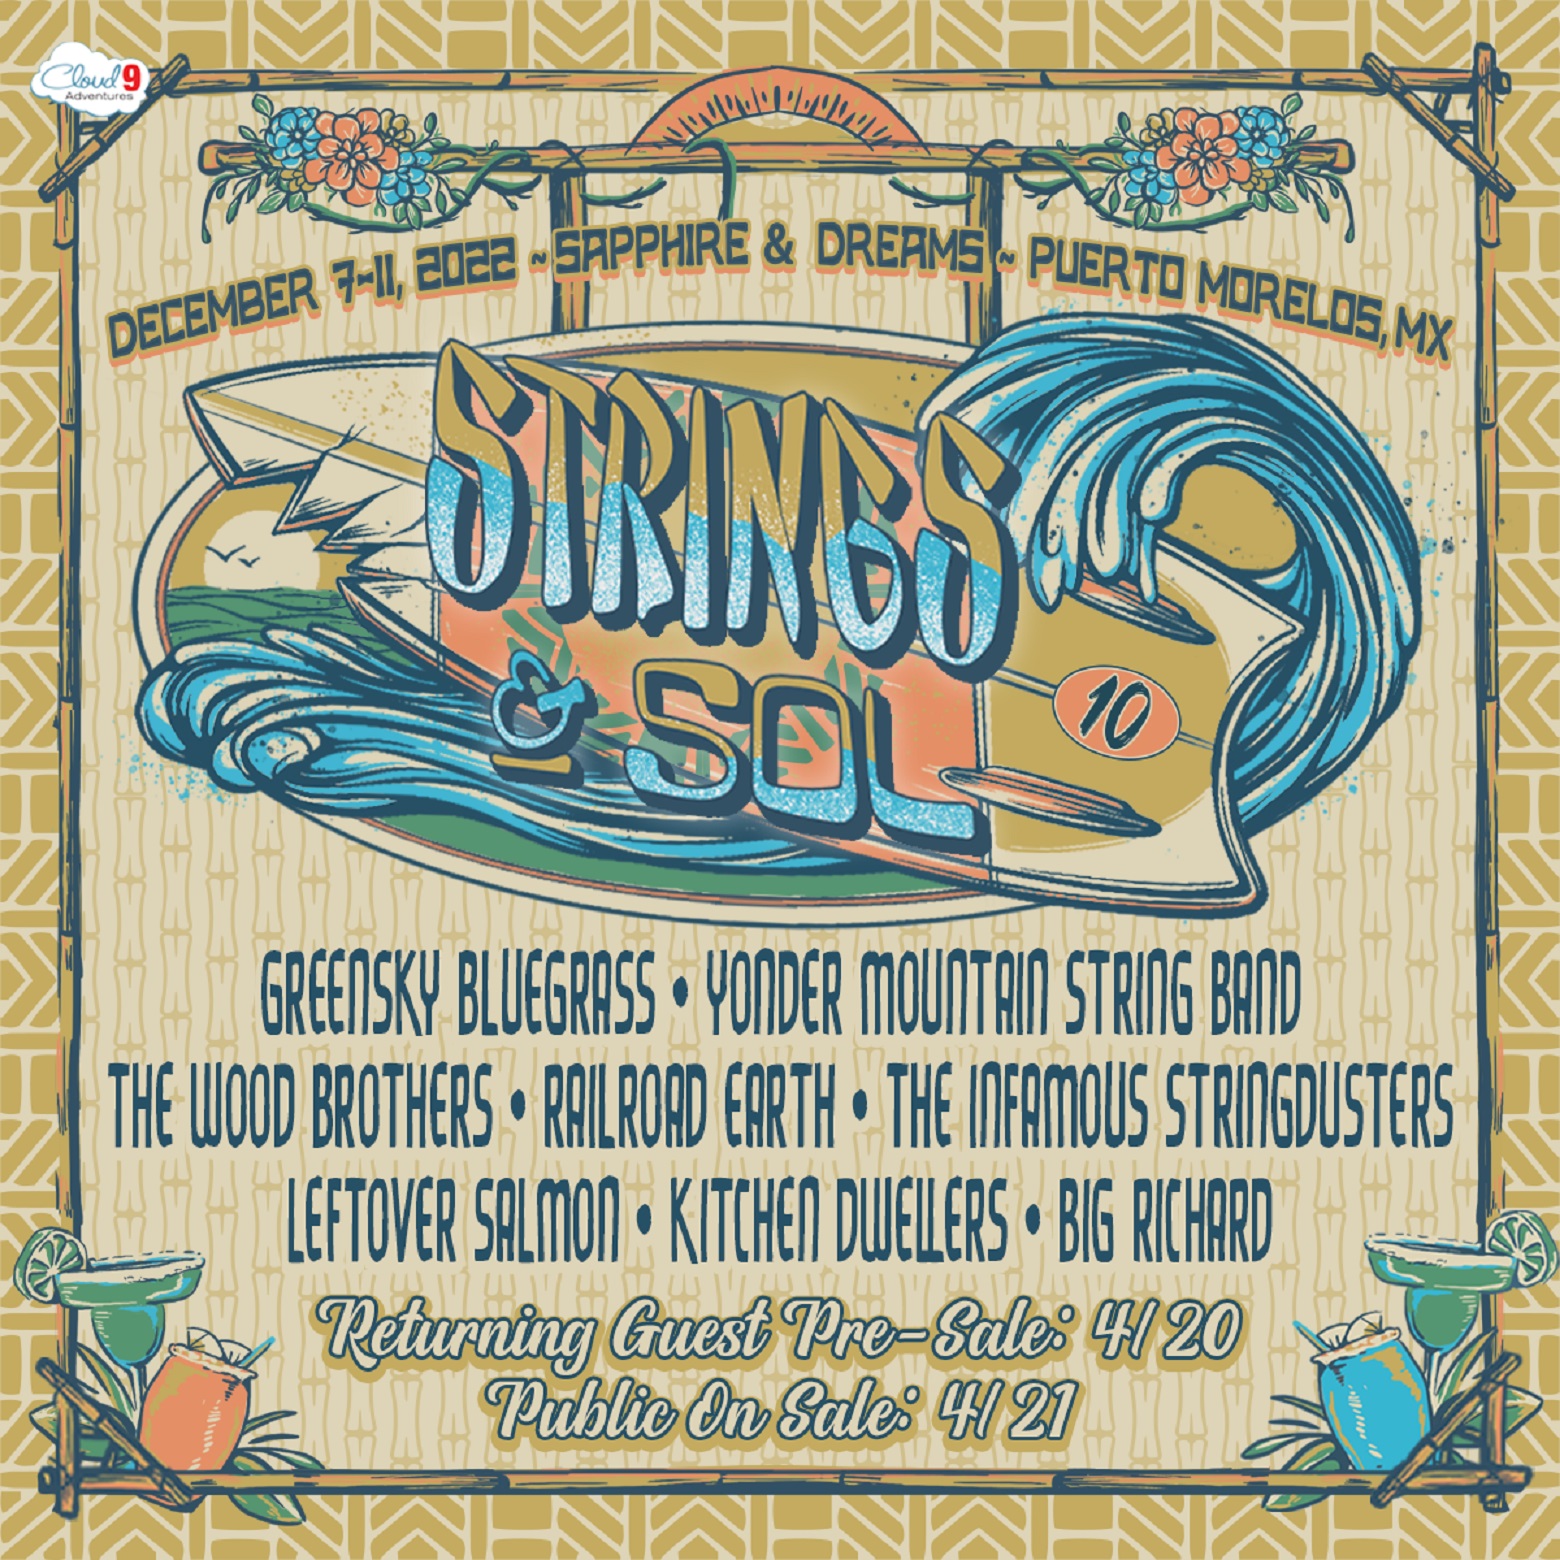 Strings & Sol Announces Lineup and Event Details for Tenth All-Inclusive Concert Vacation in Mexico, December 7-11, 2022